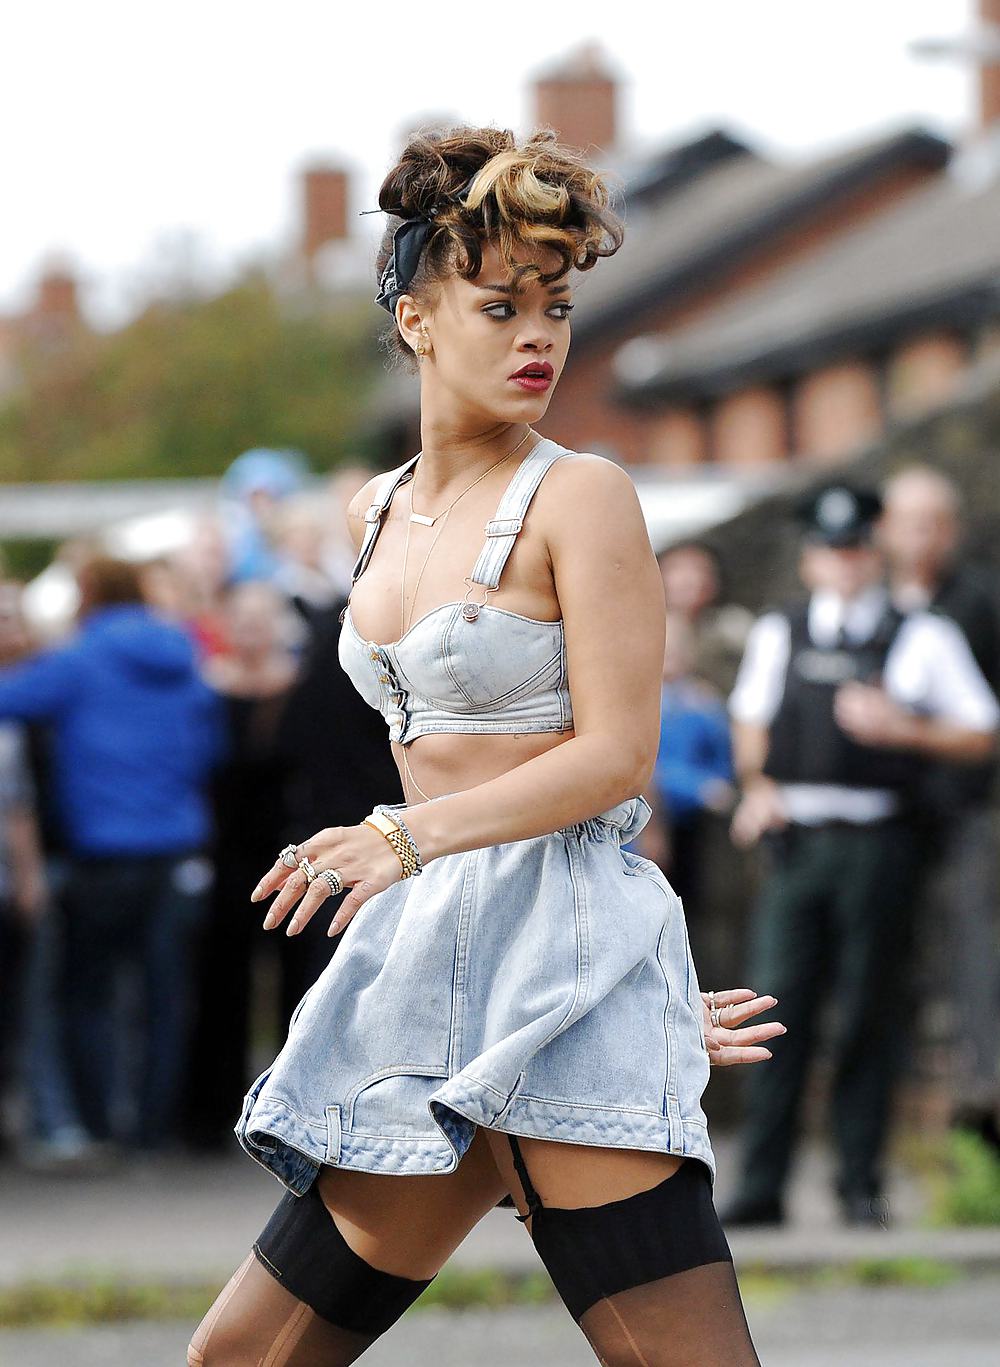 Rihanna filming the music video We Found Love in Ireland #8290614